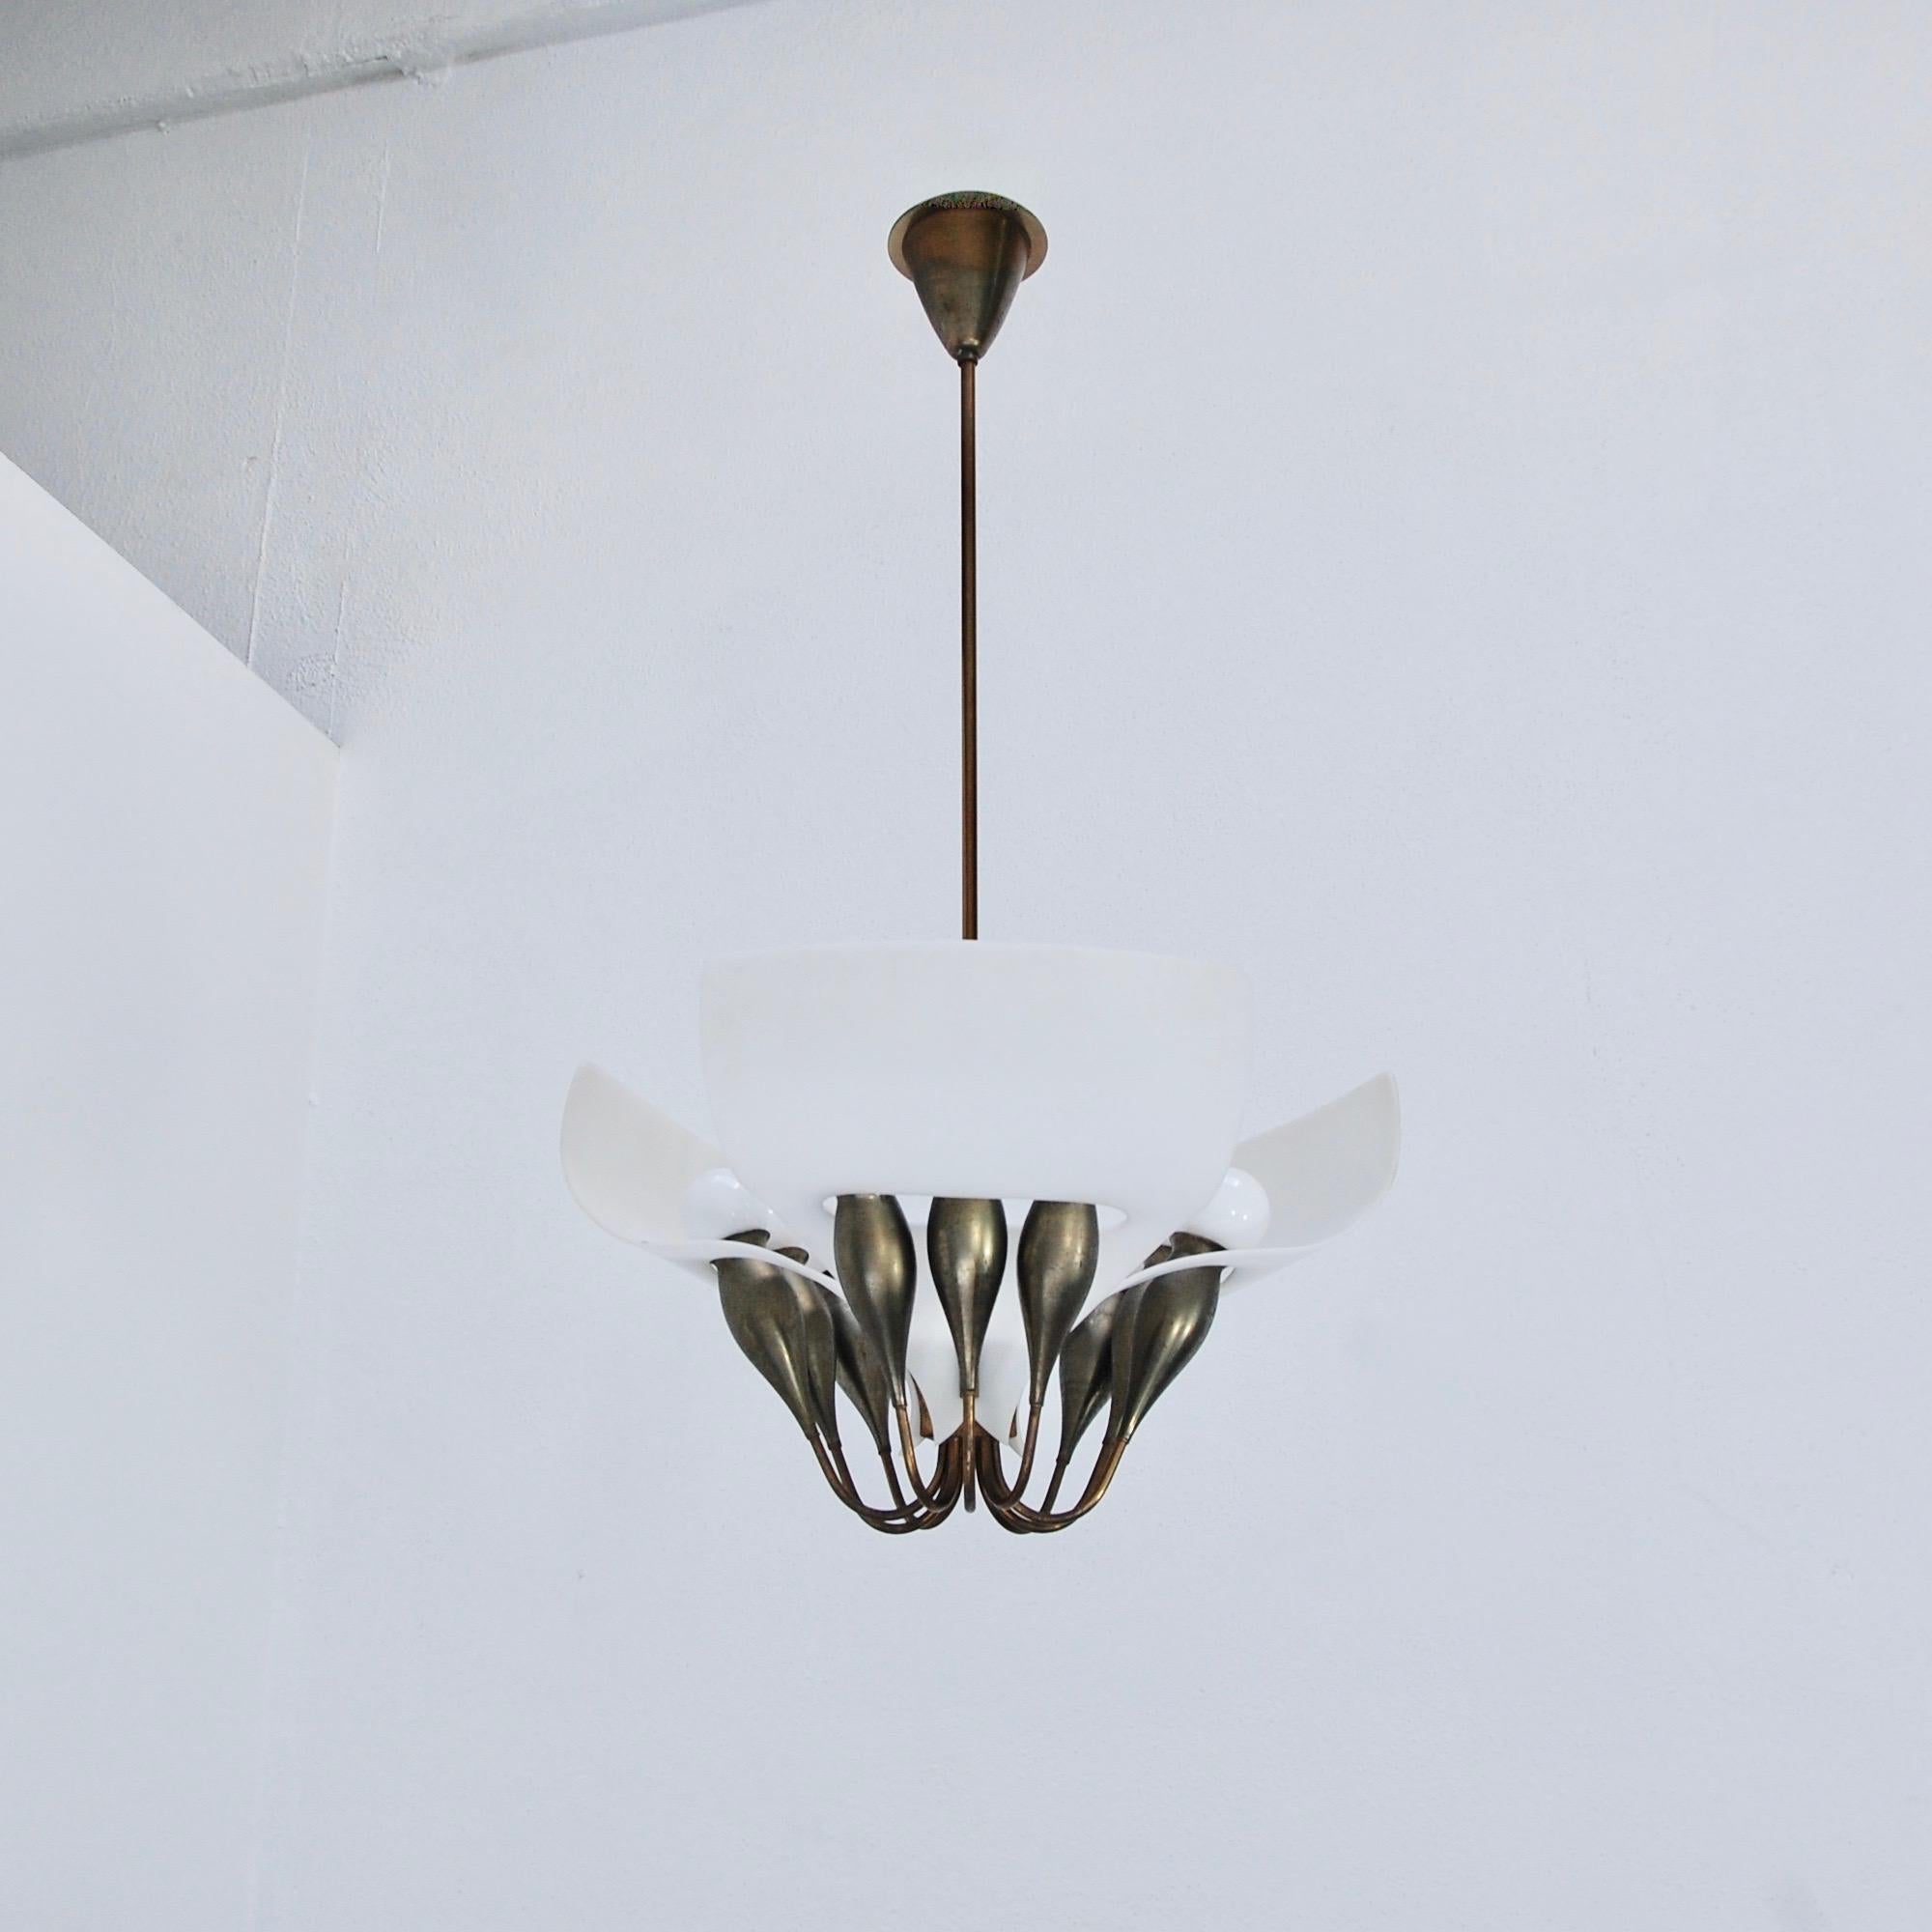 Elegant botanical tulip pendant from 1960s Italy with satin acrylic shades, brass and aged nickel hardware. Partially restored. Wired for the US with nine E12 candelabra based sockets. Light bulbs included. Overall drop adjustable upon